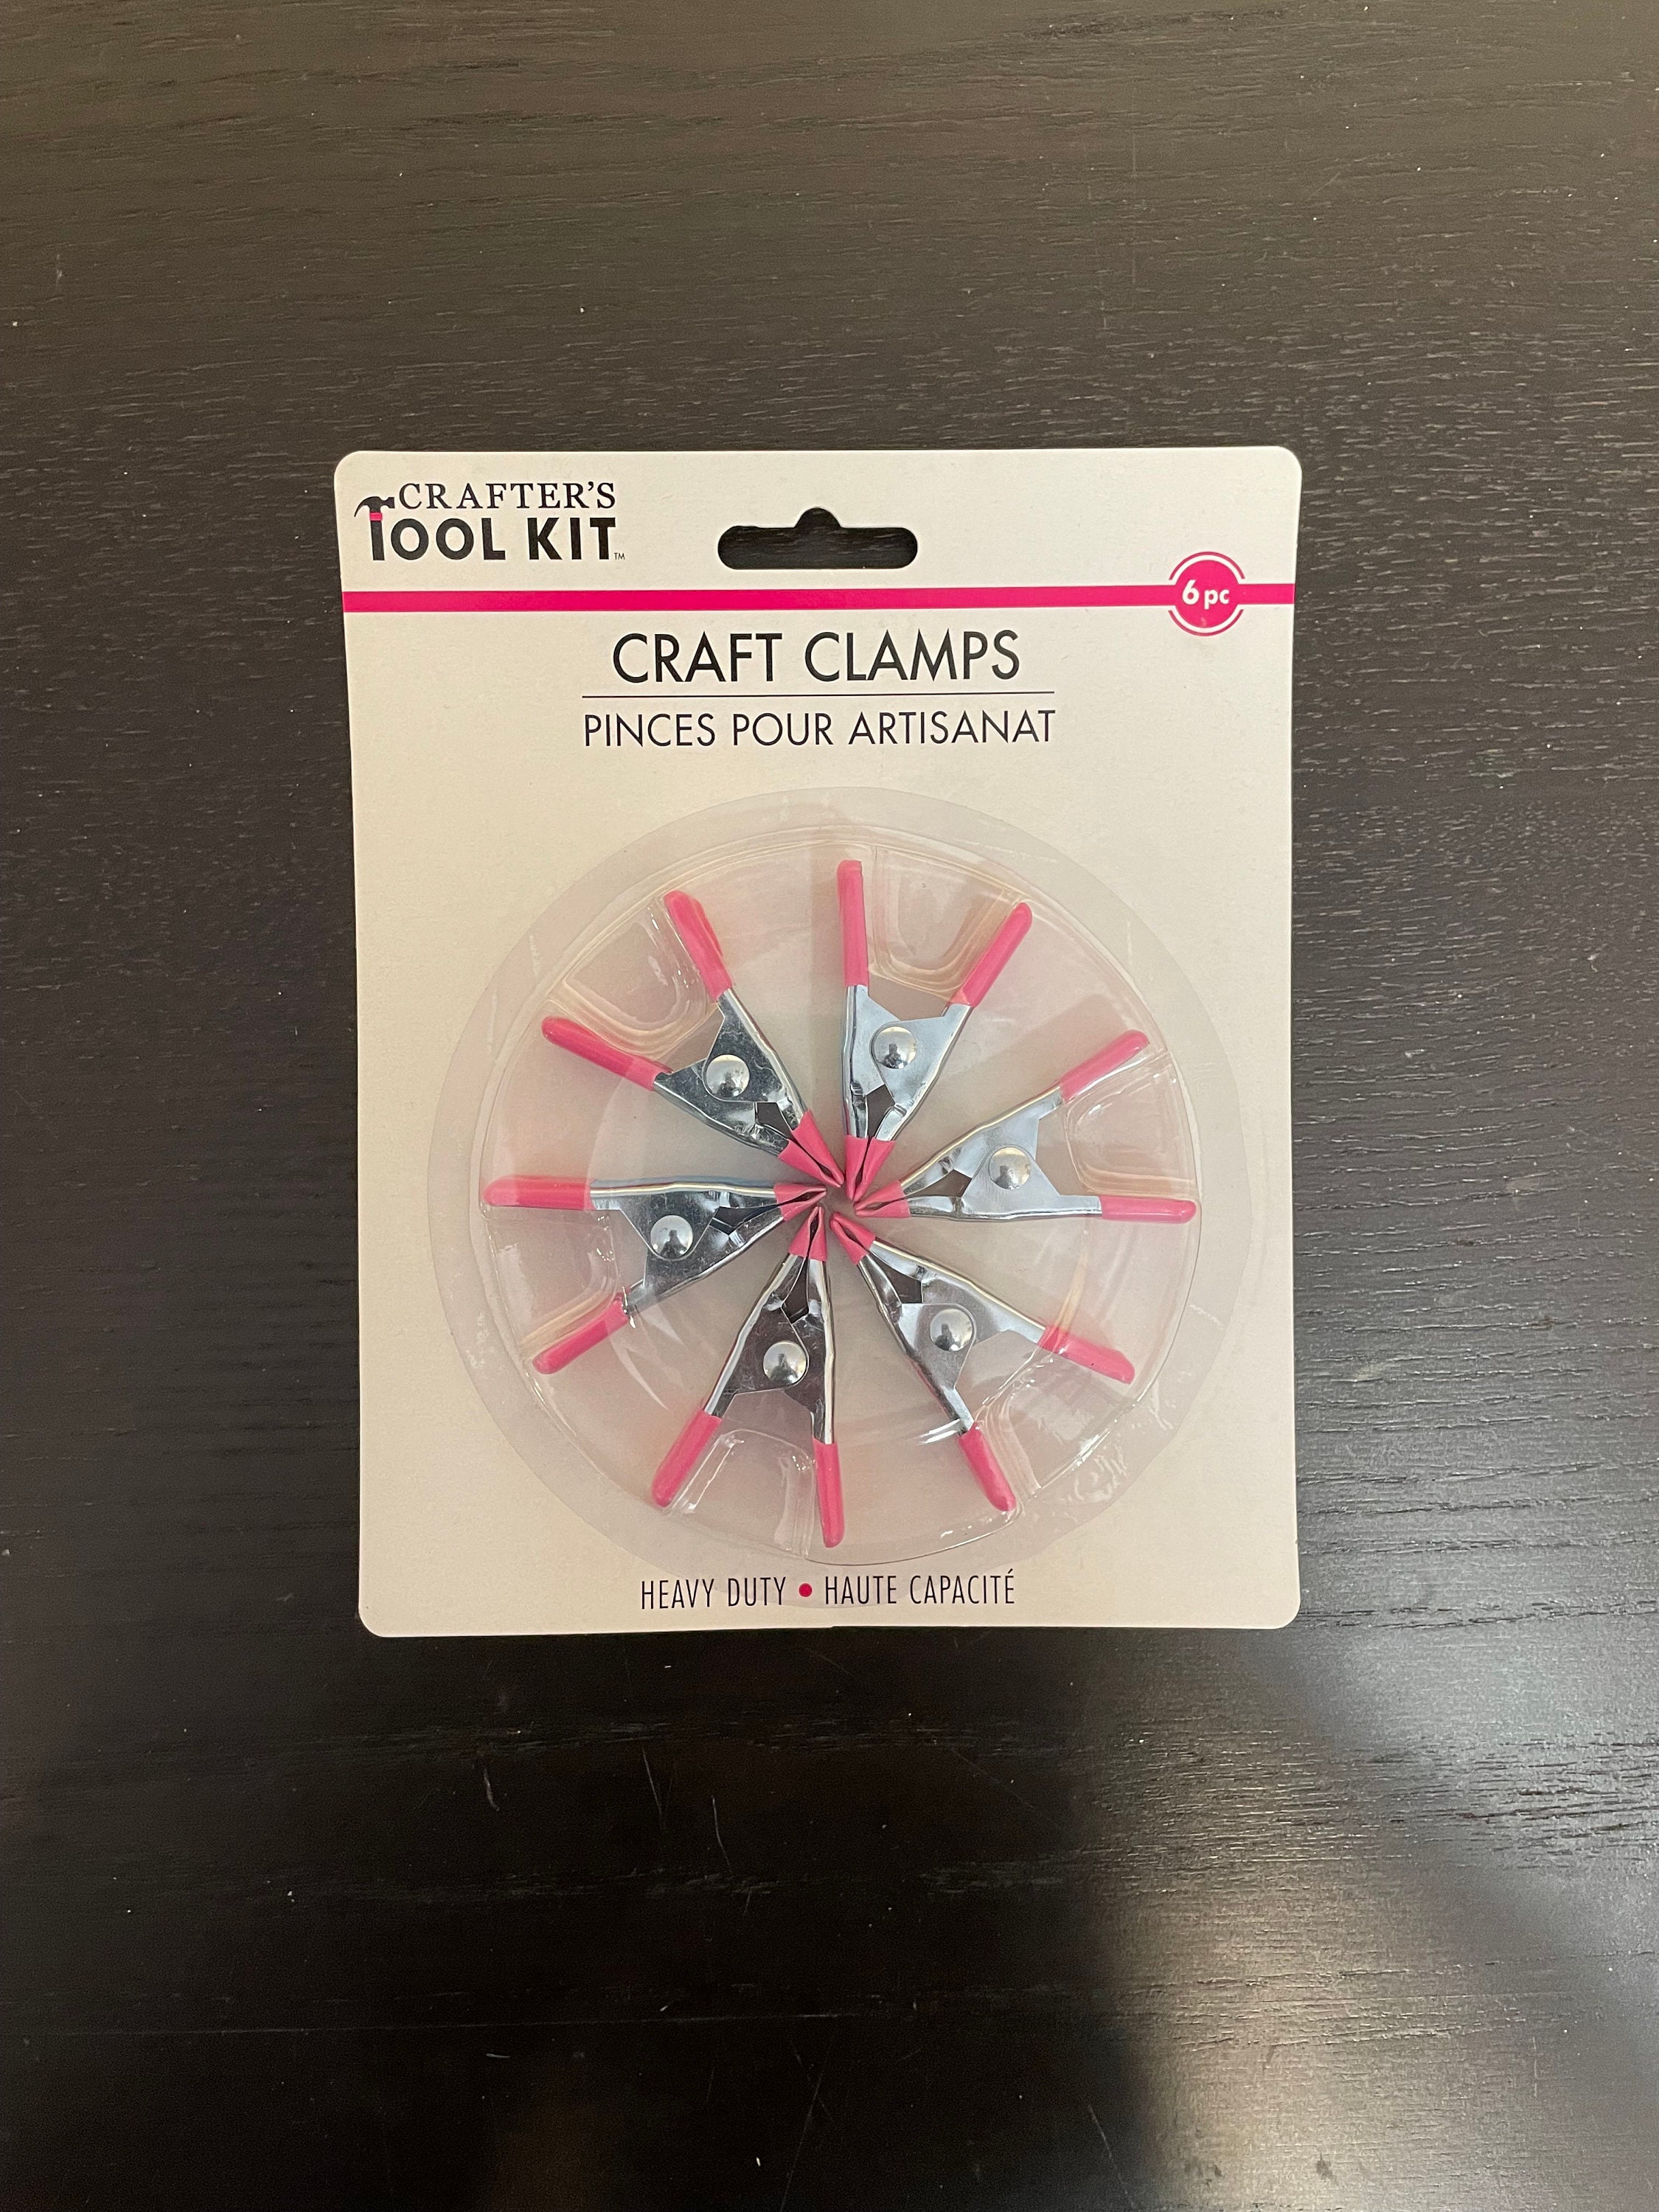  Crafter's Toolkit Round Craft-Clamps, Heavy Duty, 6